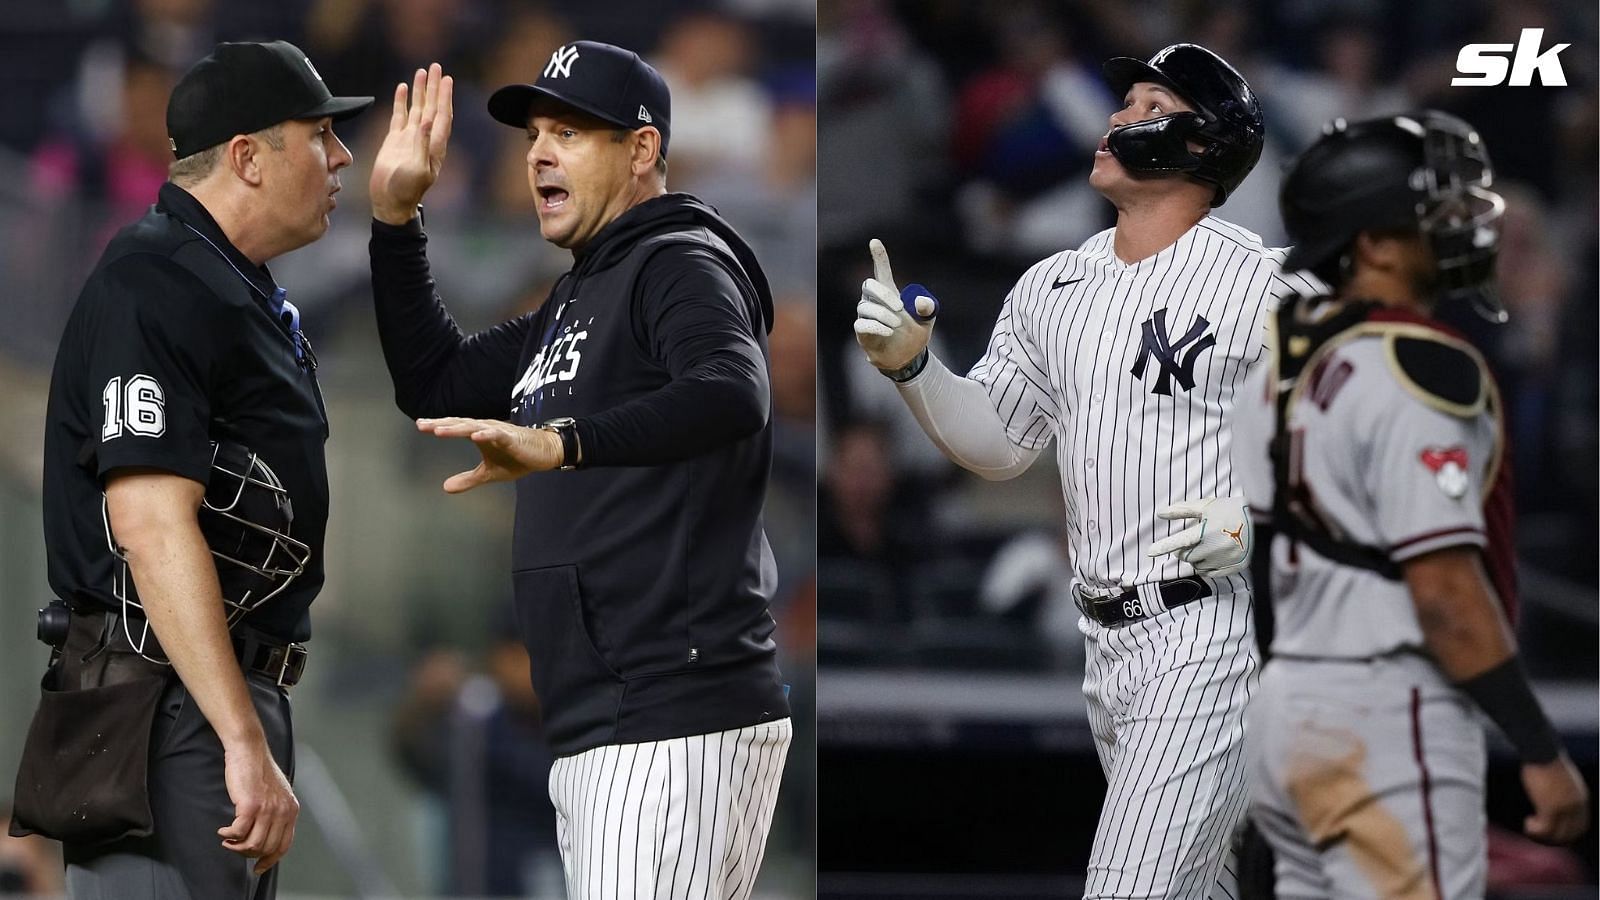 When was the last time Yankees made playoffs? Exploring Bronx Bombers'  postseason history amid faltering season